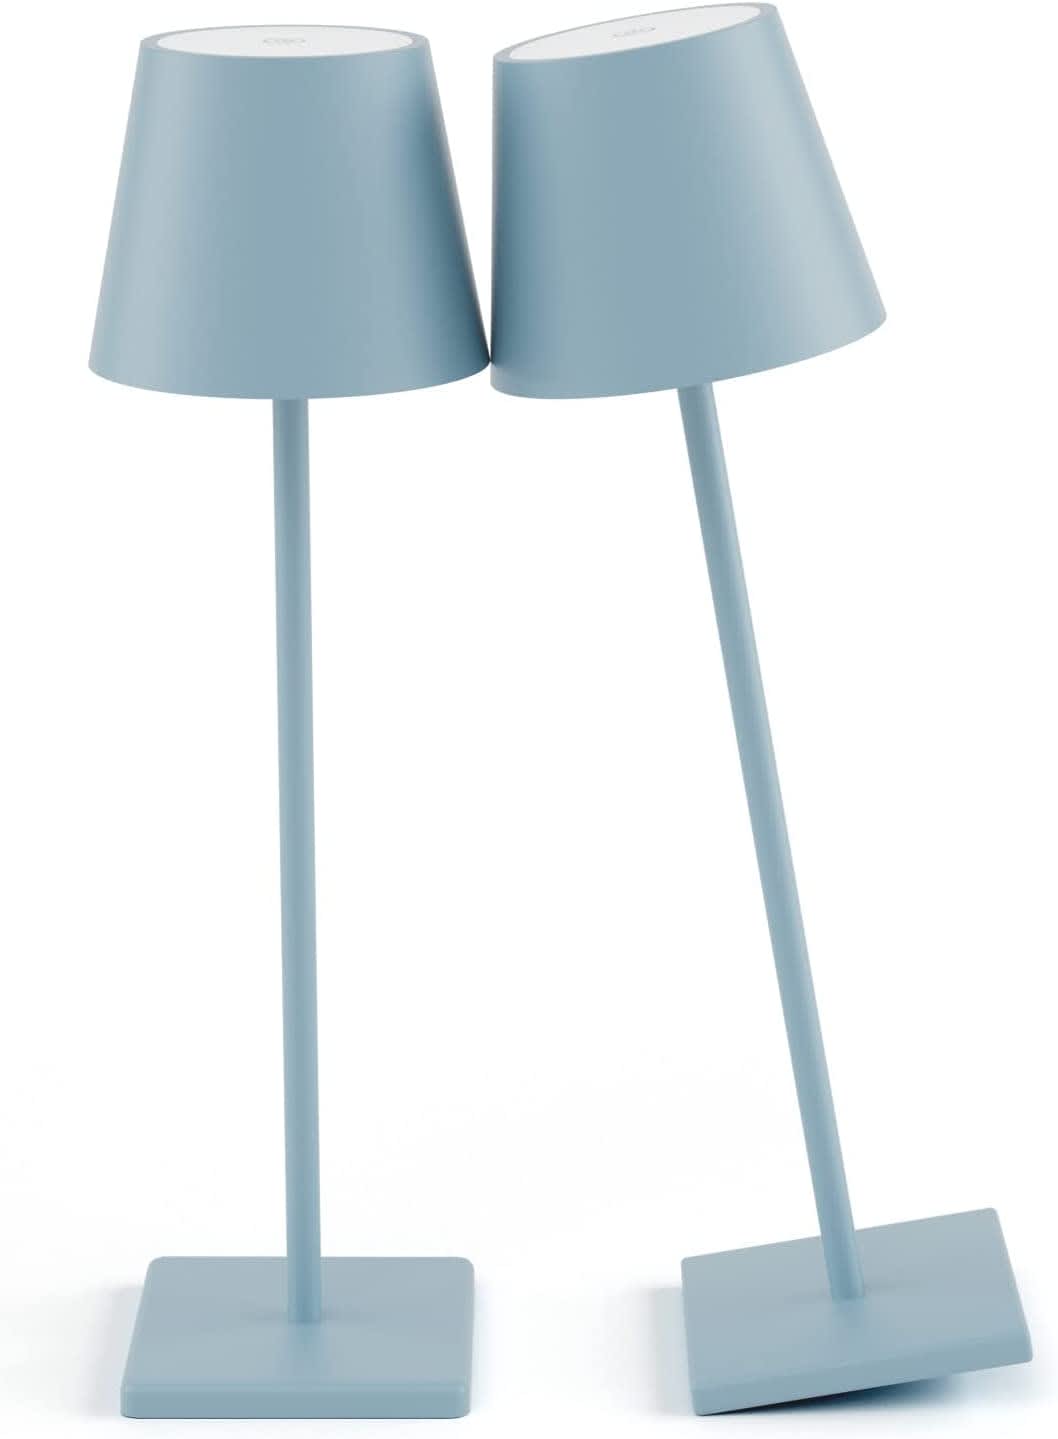 http://cdn.apartmenttherapy.info/image/upload/v1681852851/commerce/Rechargeable-LED-Table-Lamps-amazon.jpg